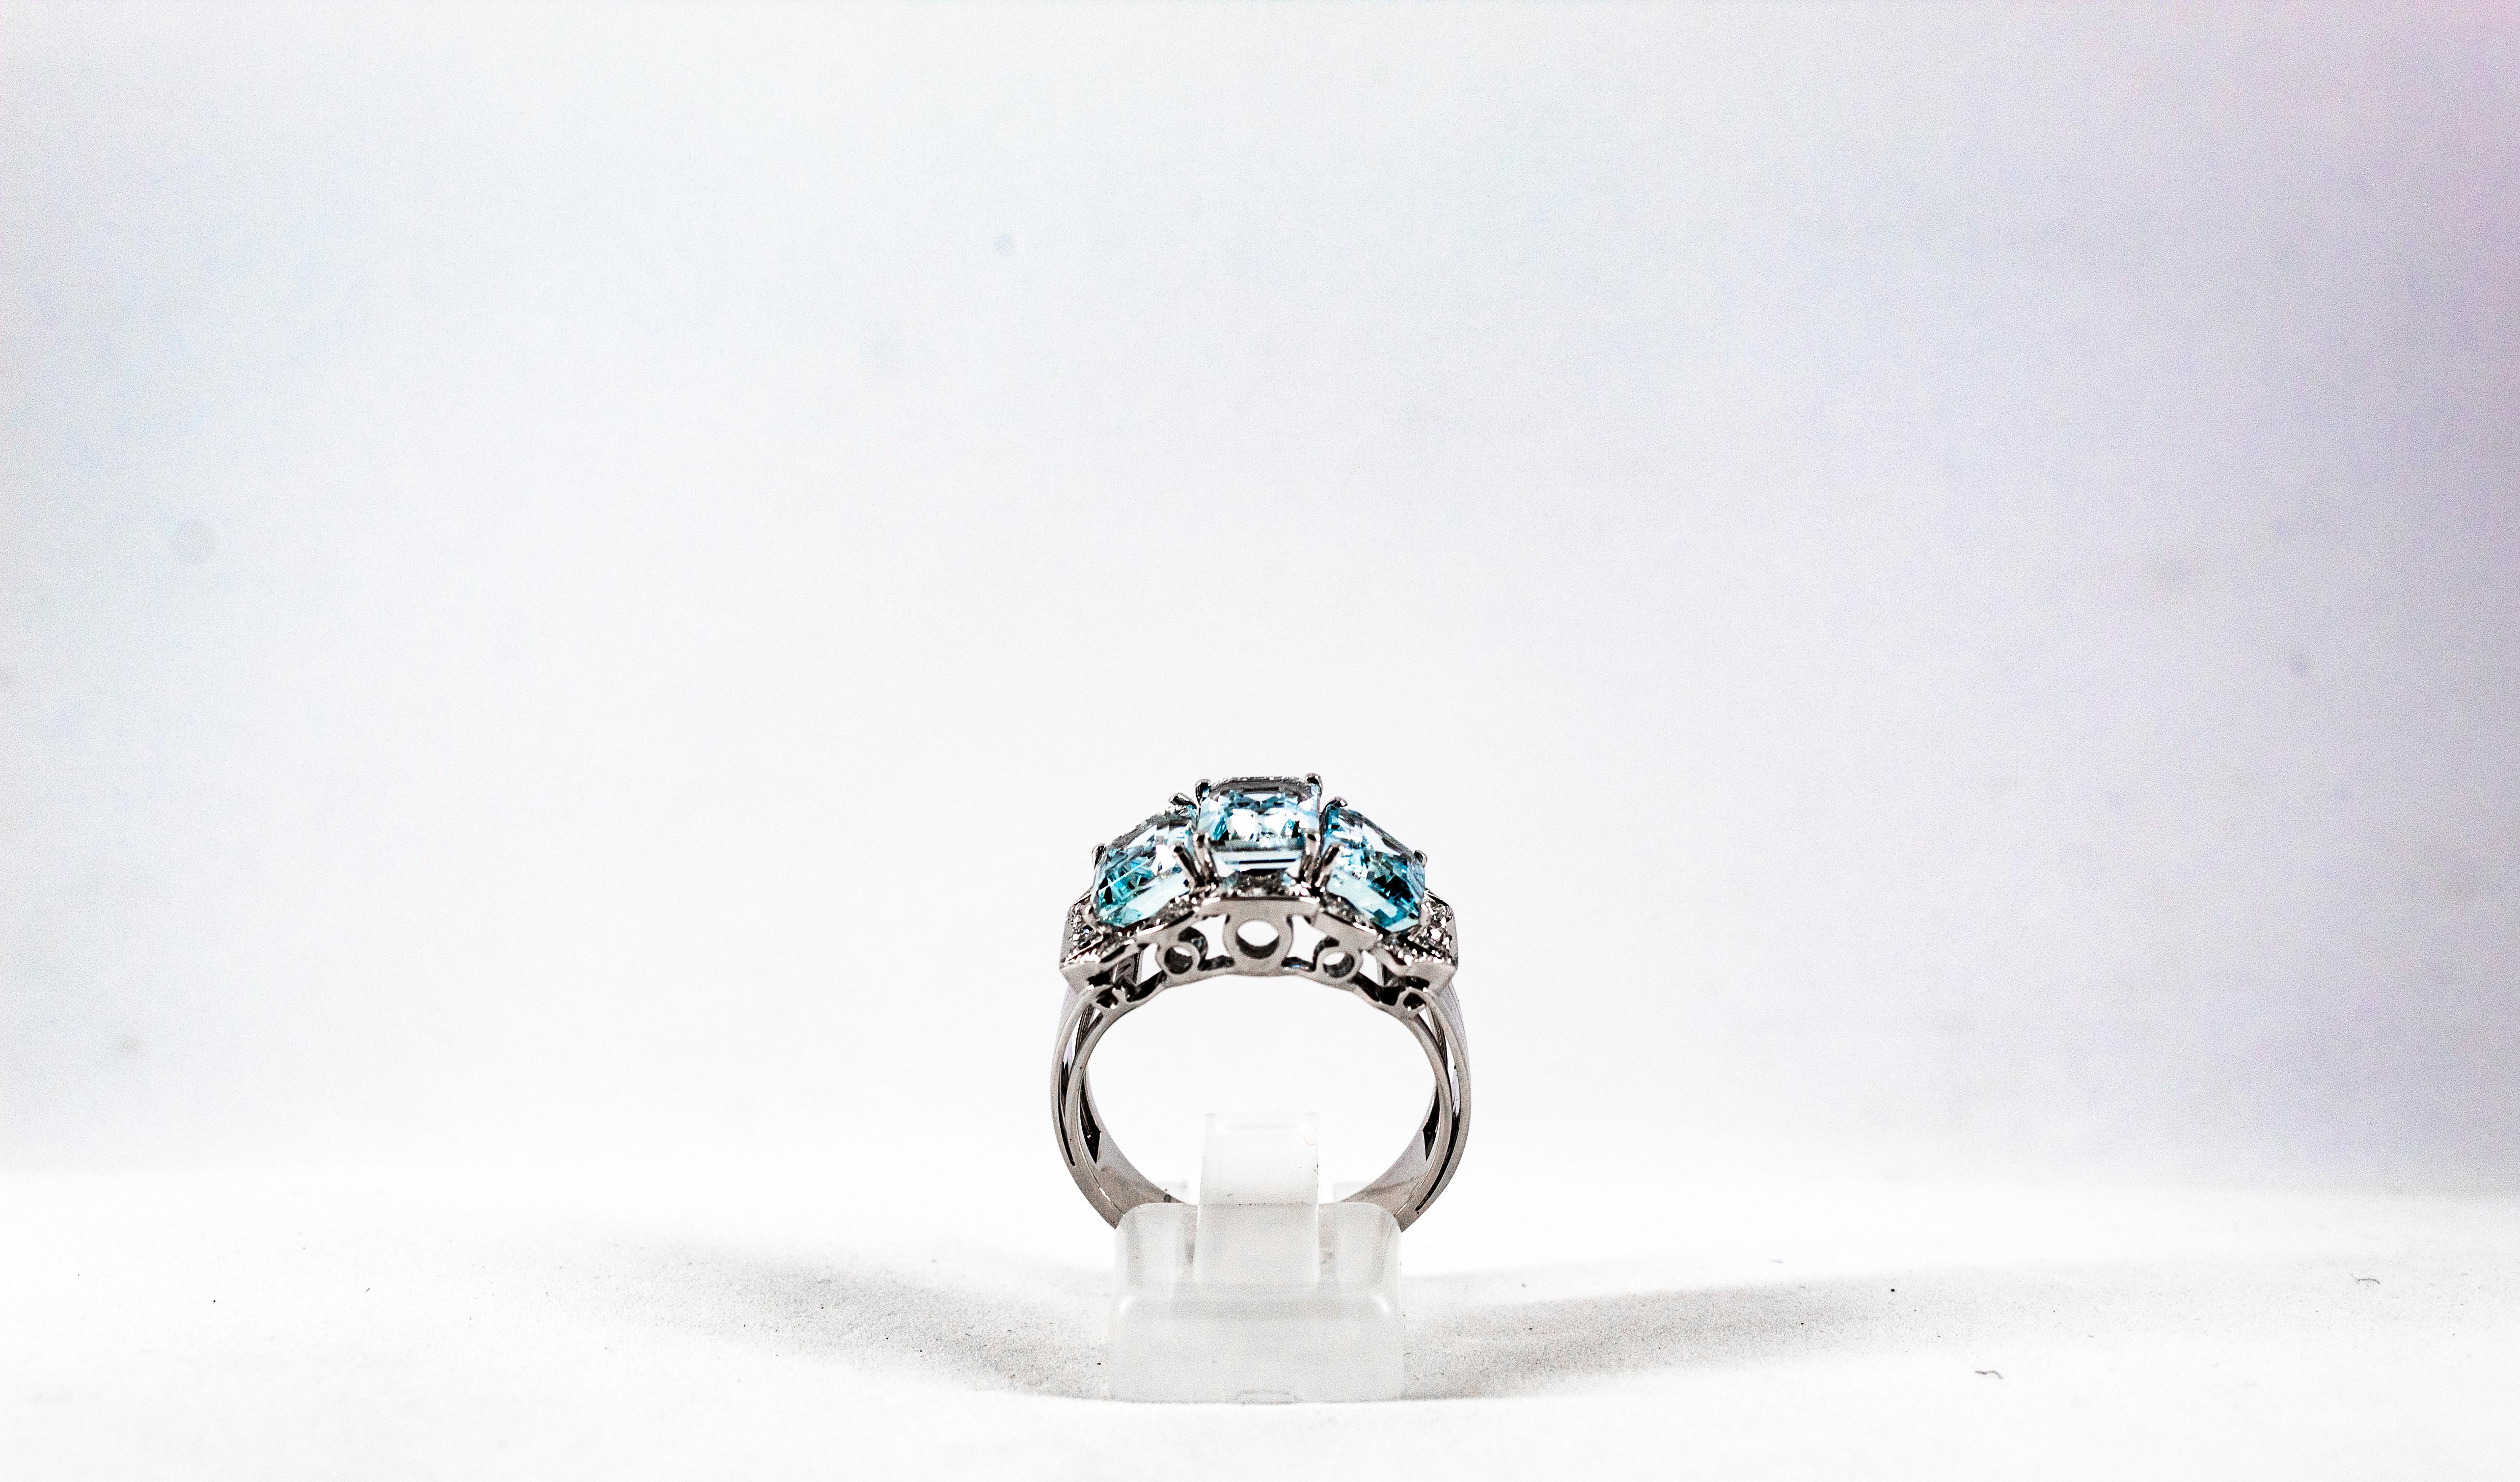 This Ring is made of 14K White Gold.
This Ring has 0.45 Carats of White Brilliant Cut Diamonds.
This Ring has 4.00 Carats of Emerald cut Aquamarine.

Size ITA: 17 USA: 8

We're a workshop so every piece is handmade, customizable and resizable.